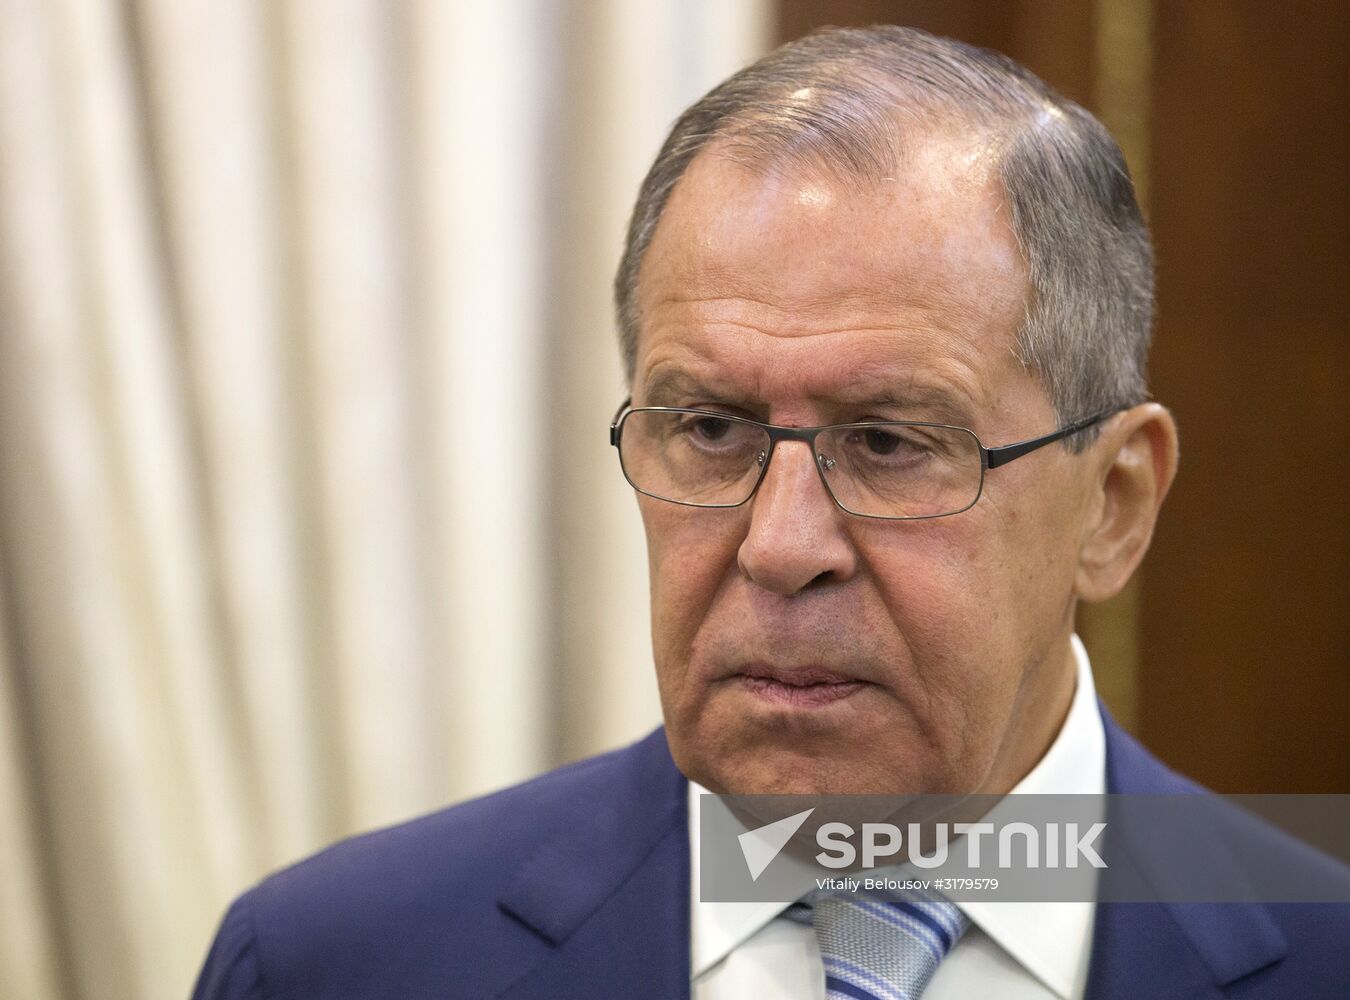 Russian Foreign Minister Sergei Lavrov visits Kuwait